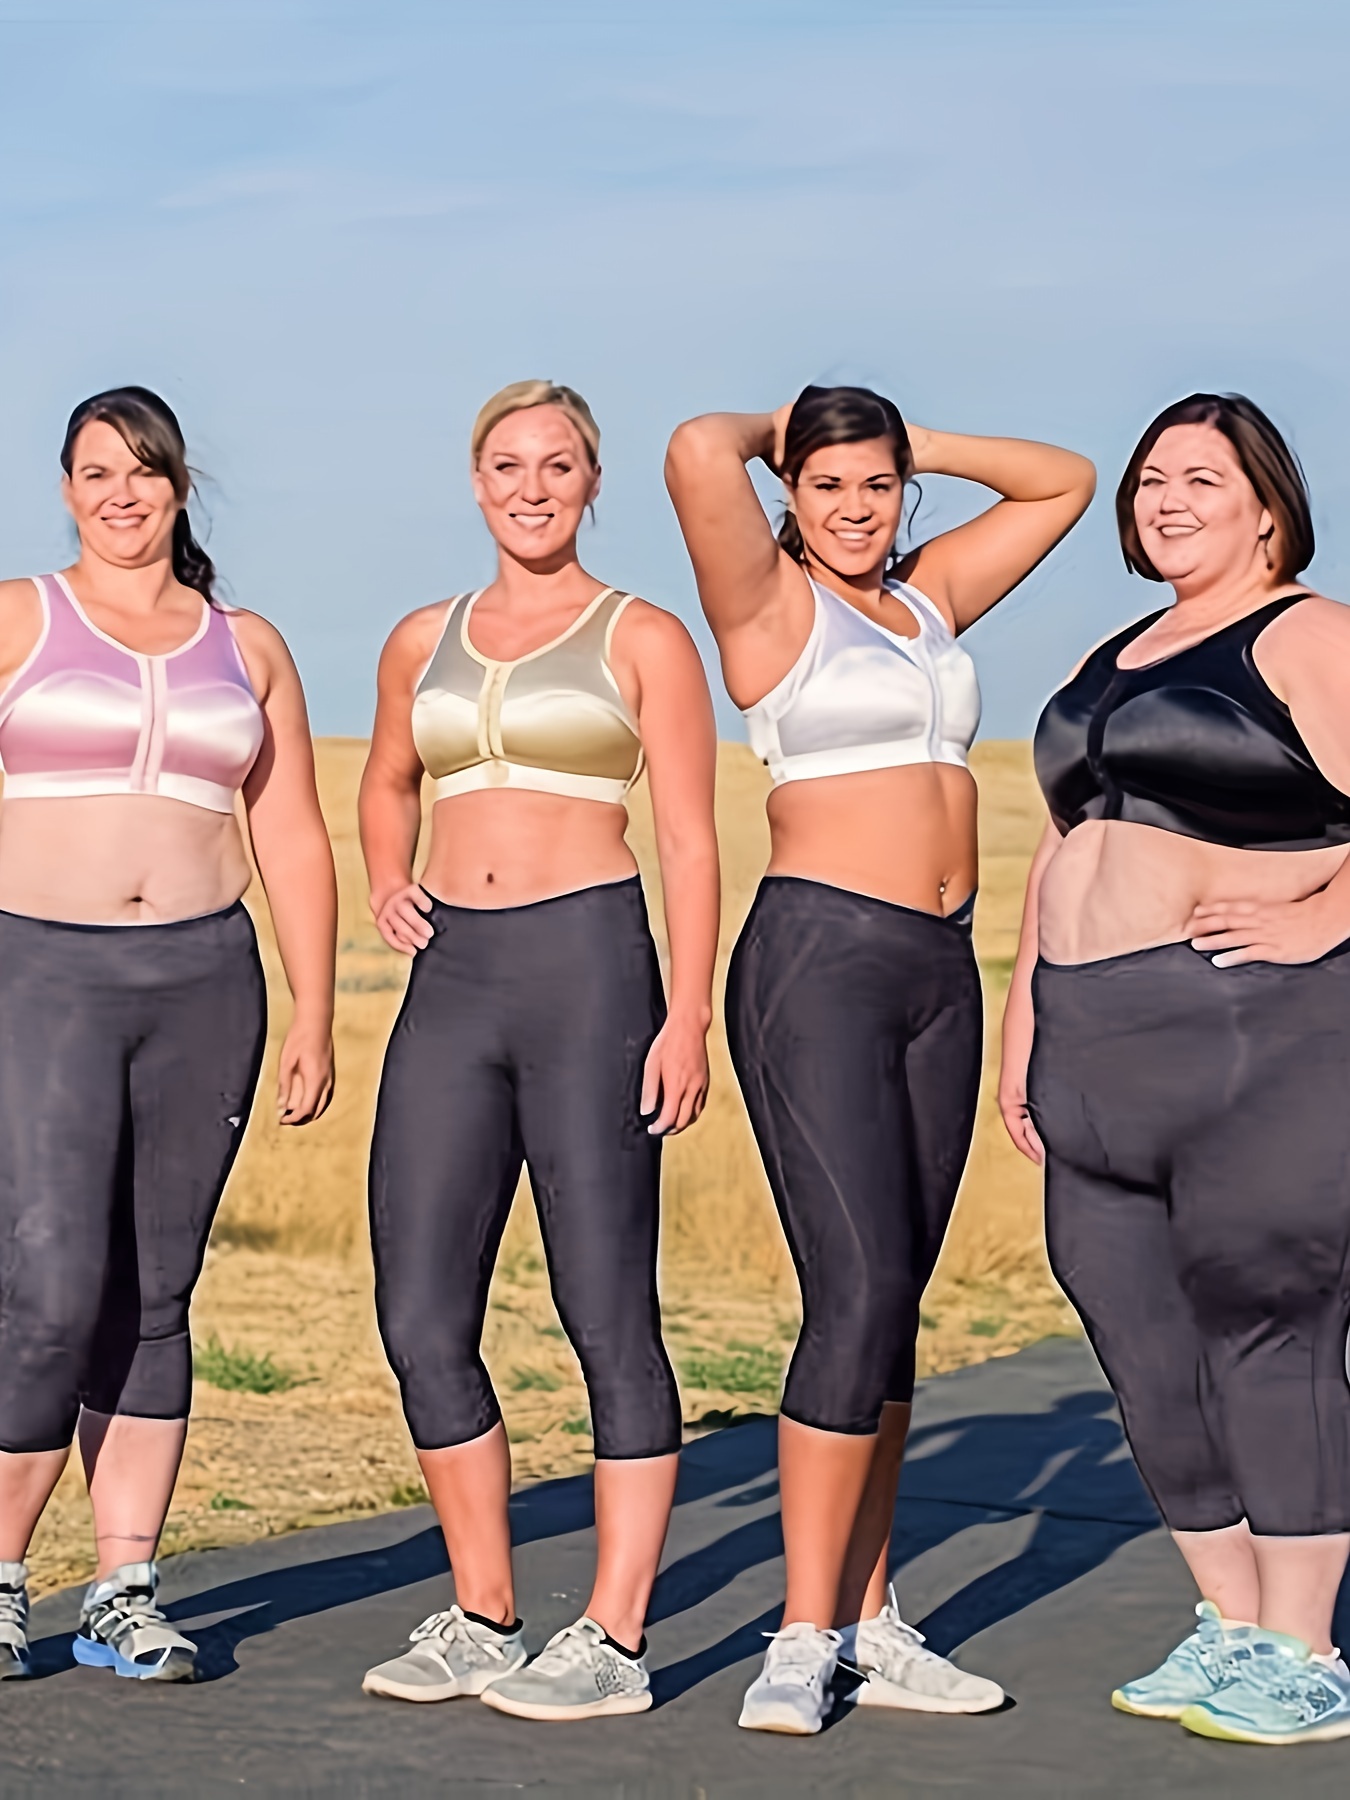 Plus Size Women's Athletic Leggings With Pockets